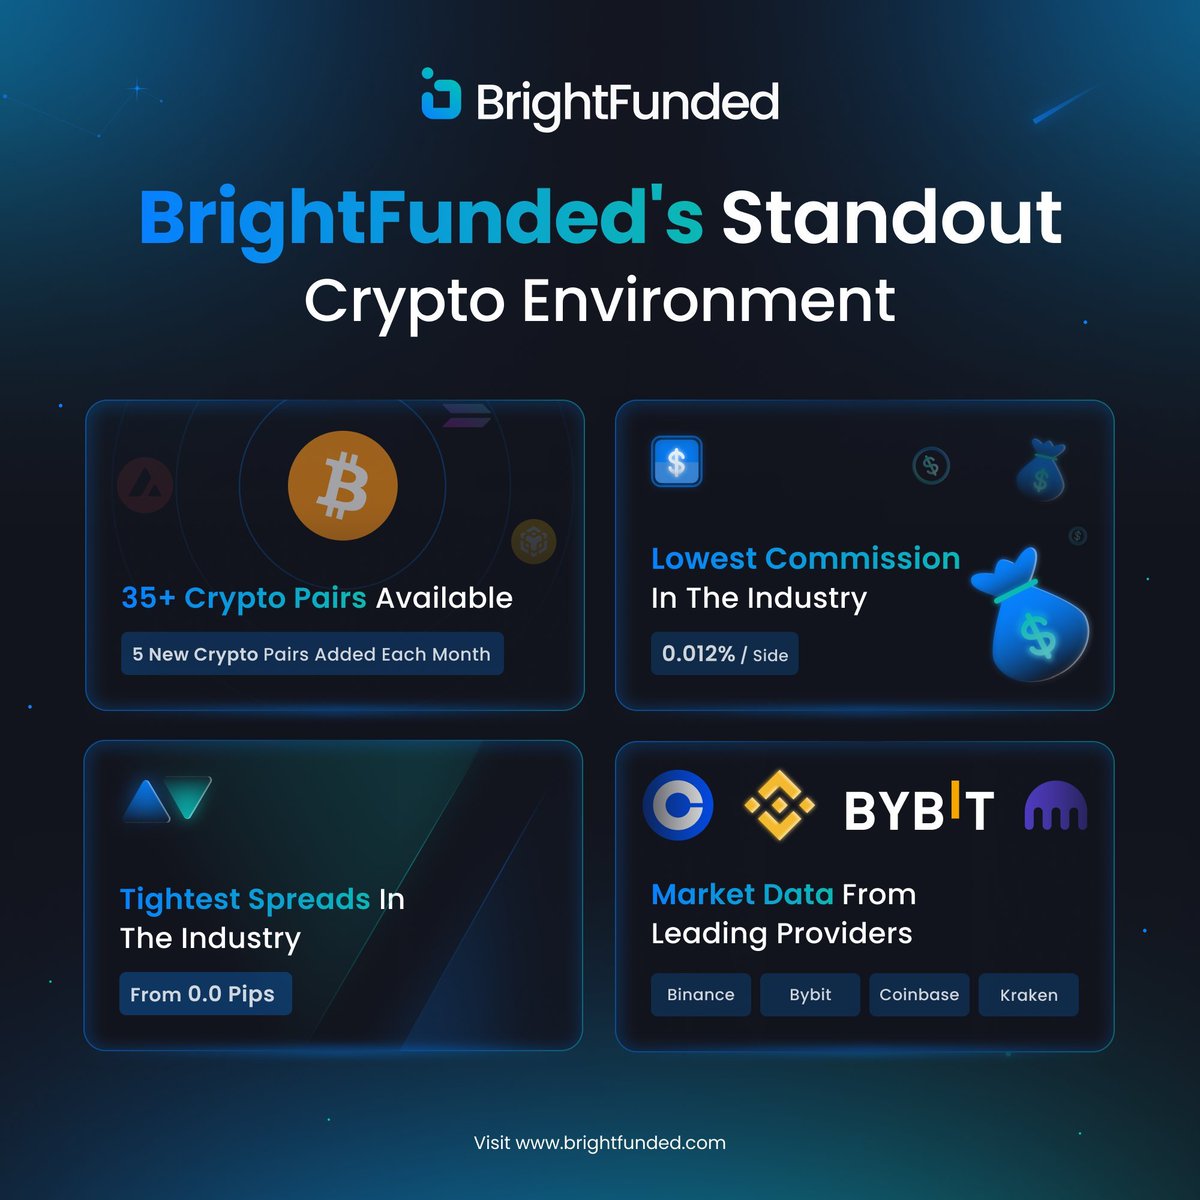 Eyeing some Crypto Pairs this weekend? 👀 BrightFunded is the industry's top firm for Crypto Trading with over 35 Crypto Pairs, the Tightest Spreads, Lowest Commissions, and Best Executions. 💎 Get Funded ➡️ BrightFunded.com